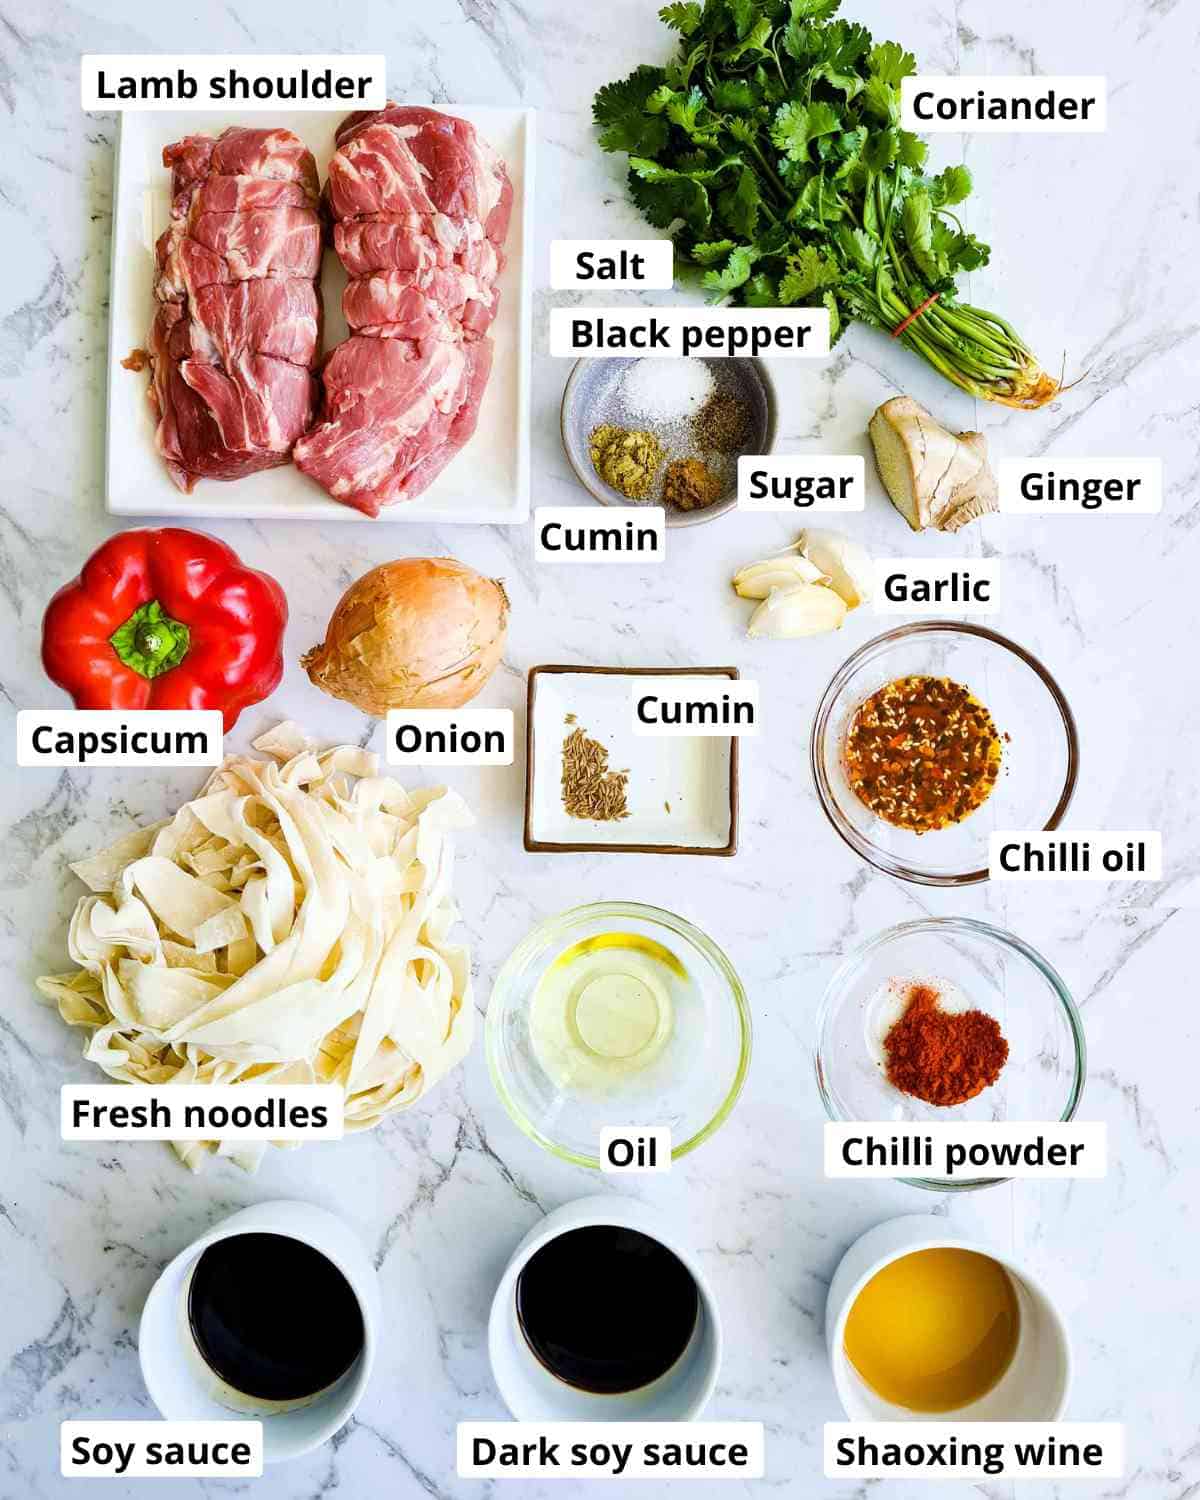 Ingredients required to make this recipe with captions